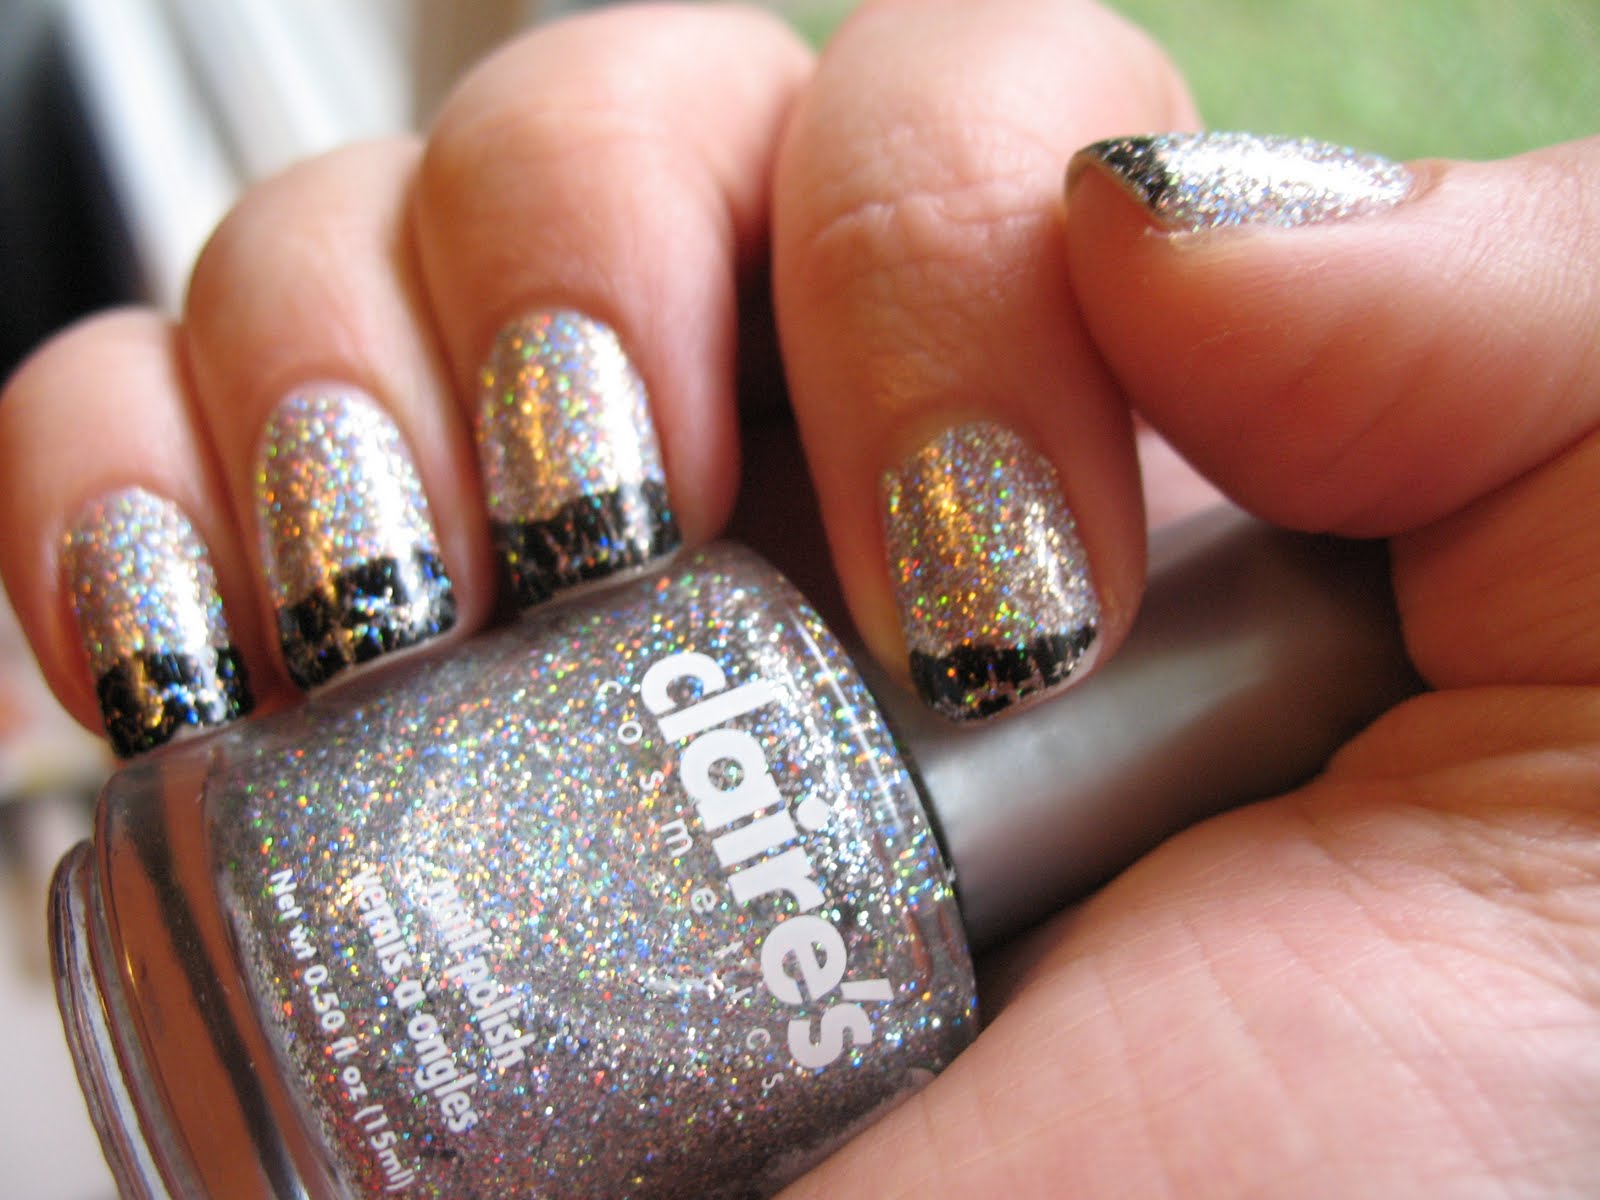 2. Metallic Party Nails - wide 6